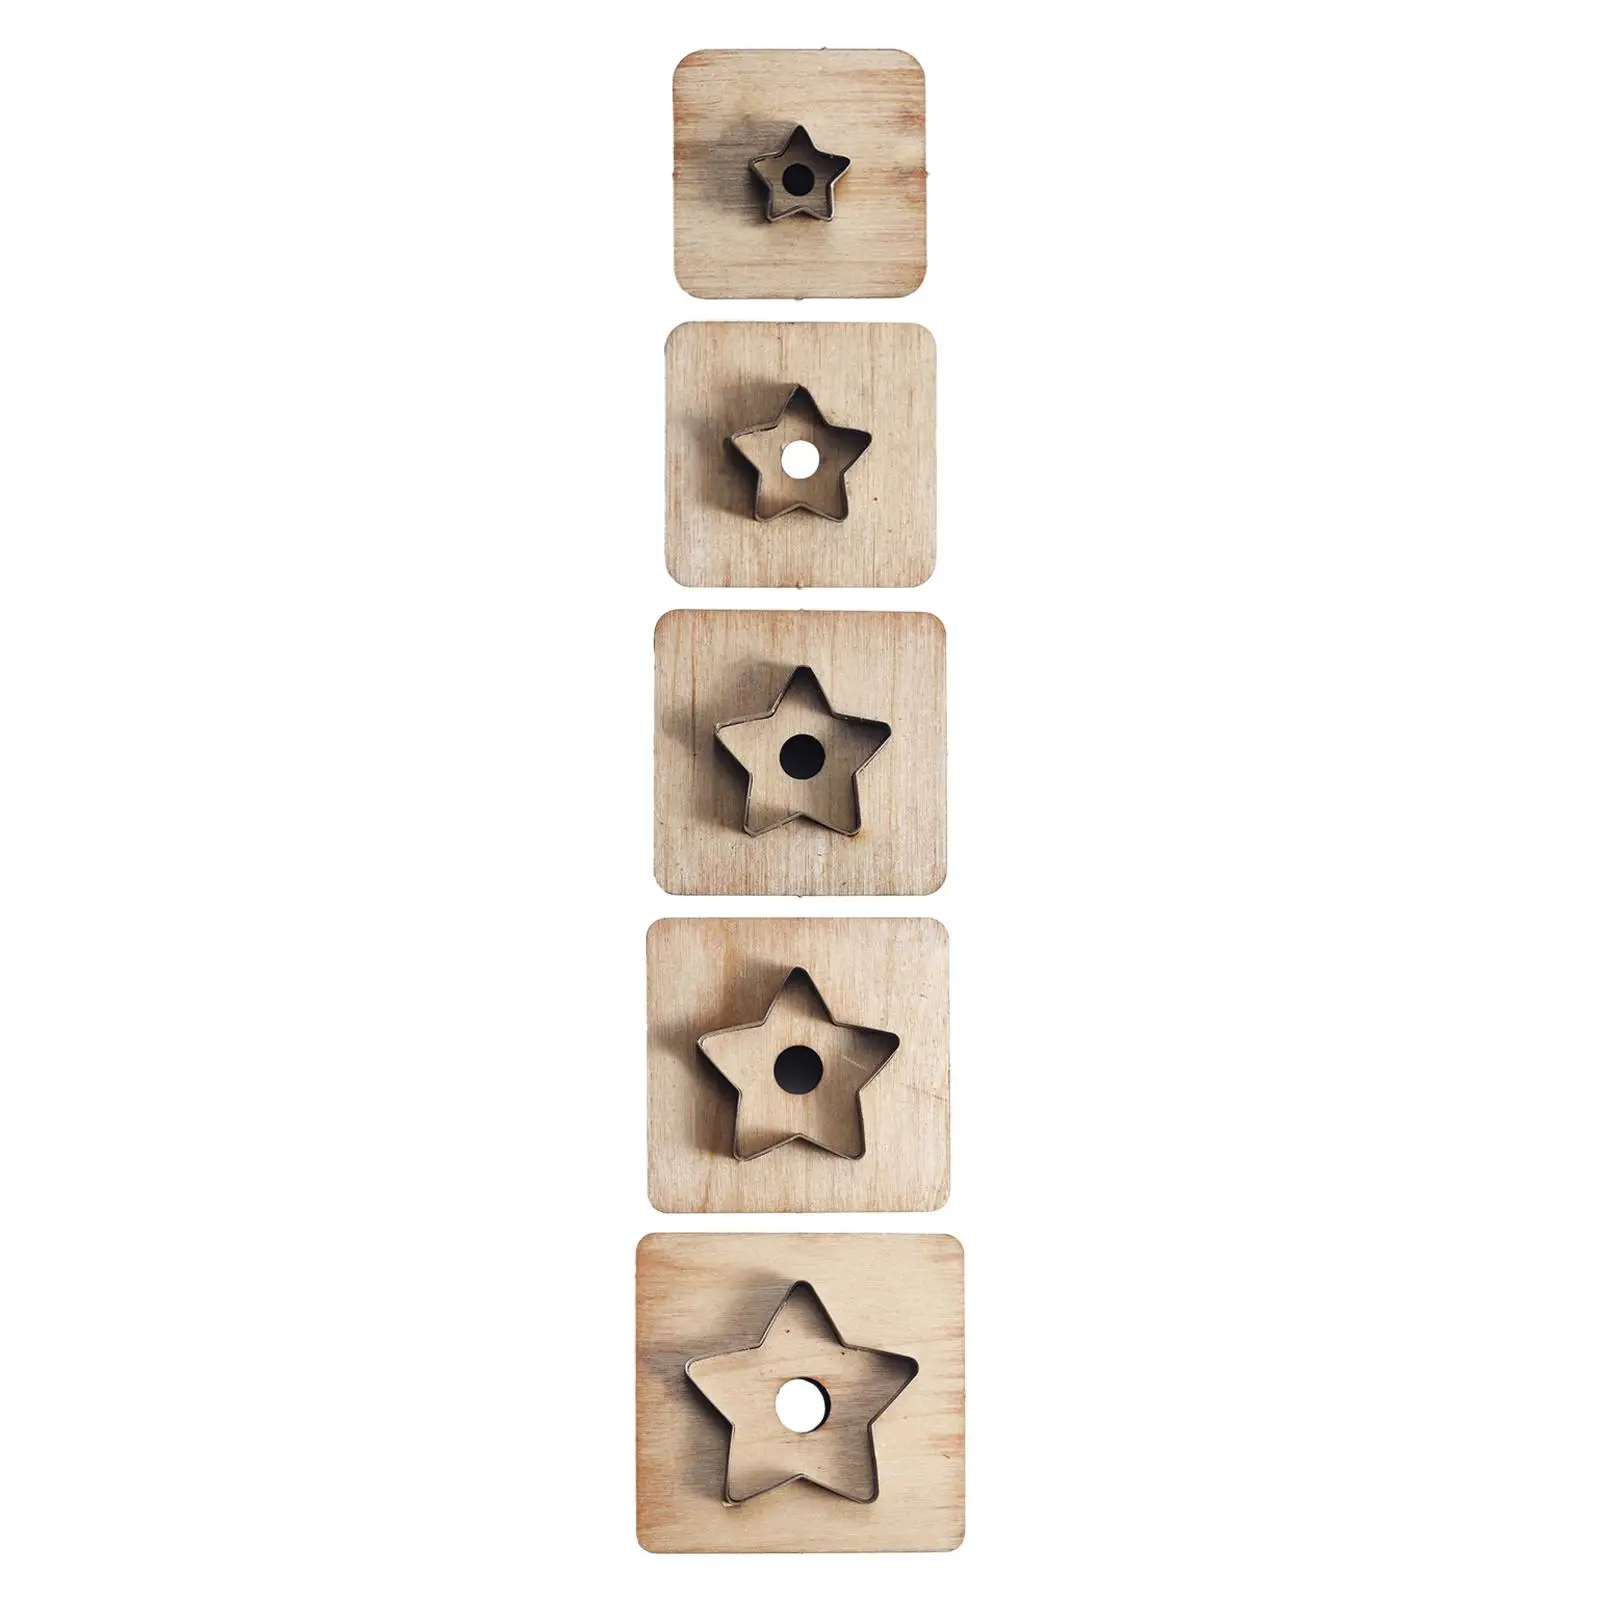 Leather Cutting Die Sturdy Making Stencil Hand Tool DIY Five Pointed Star Shape for PU Leather Papercraft Scrapbook Pouch Tailor